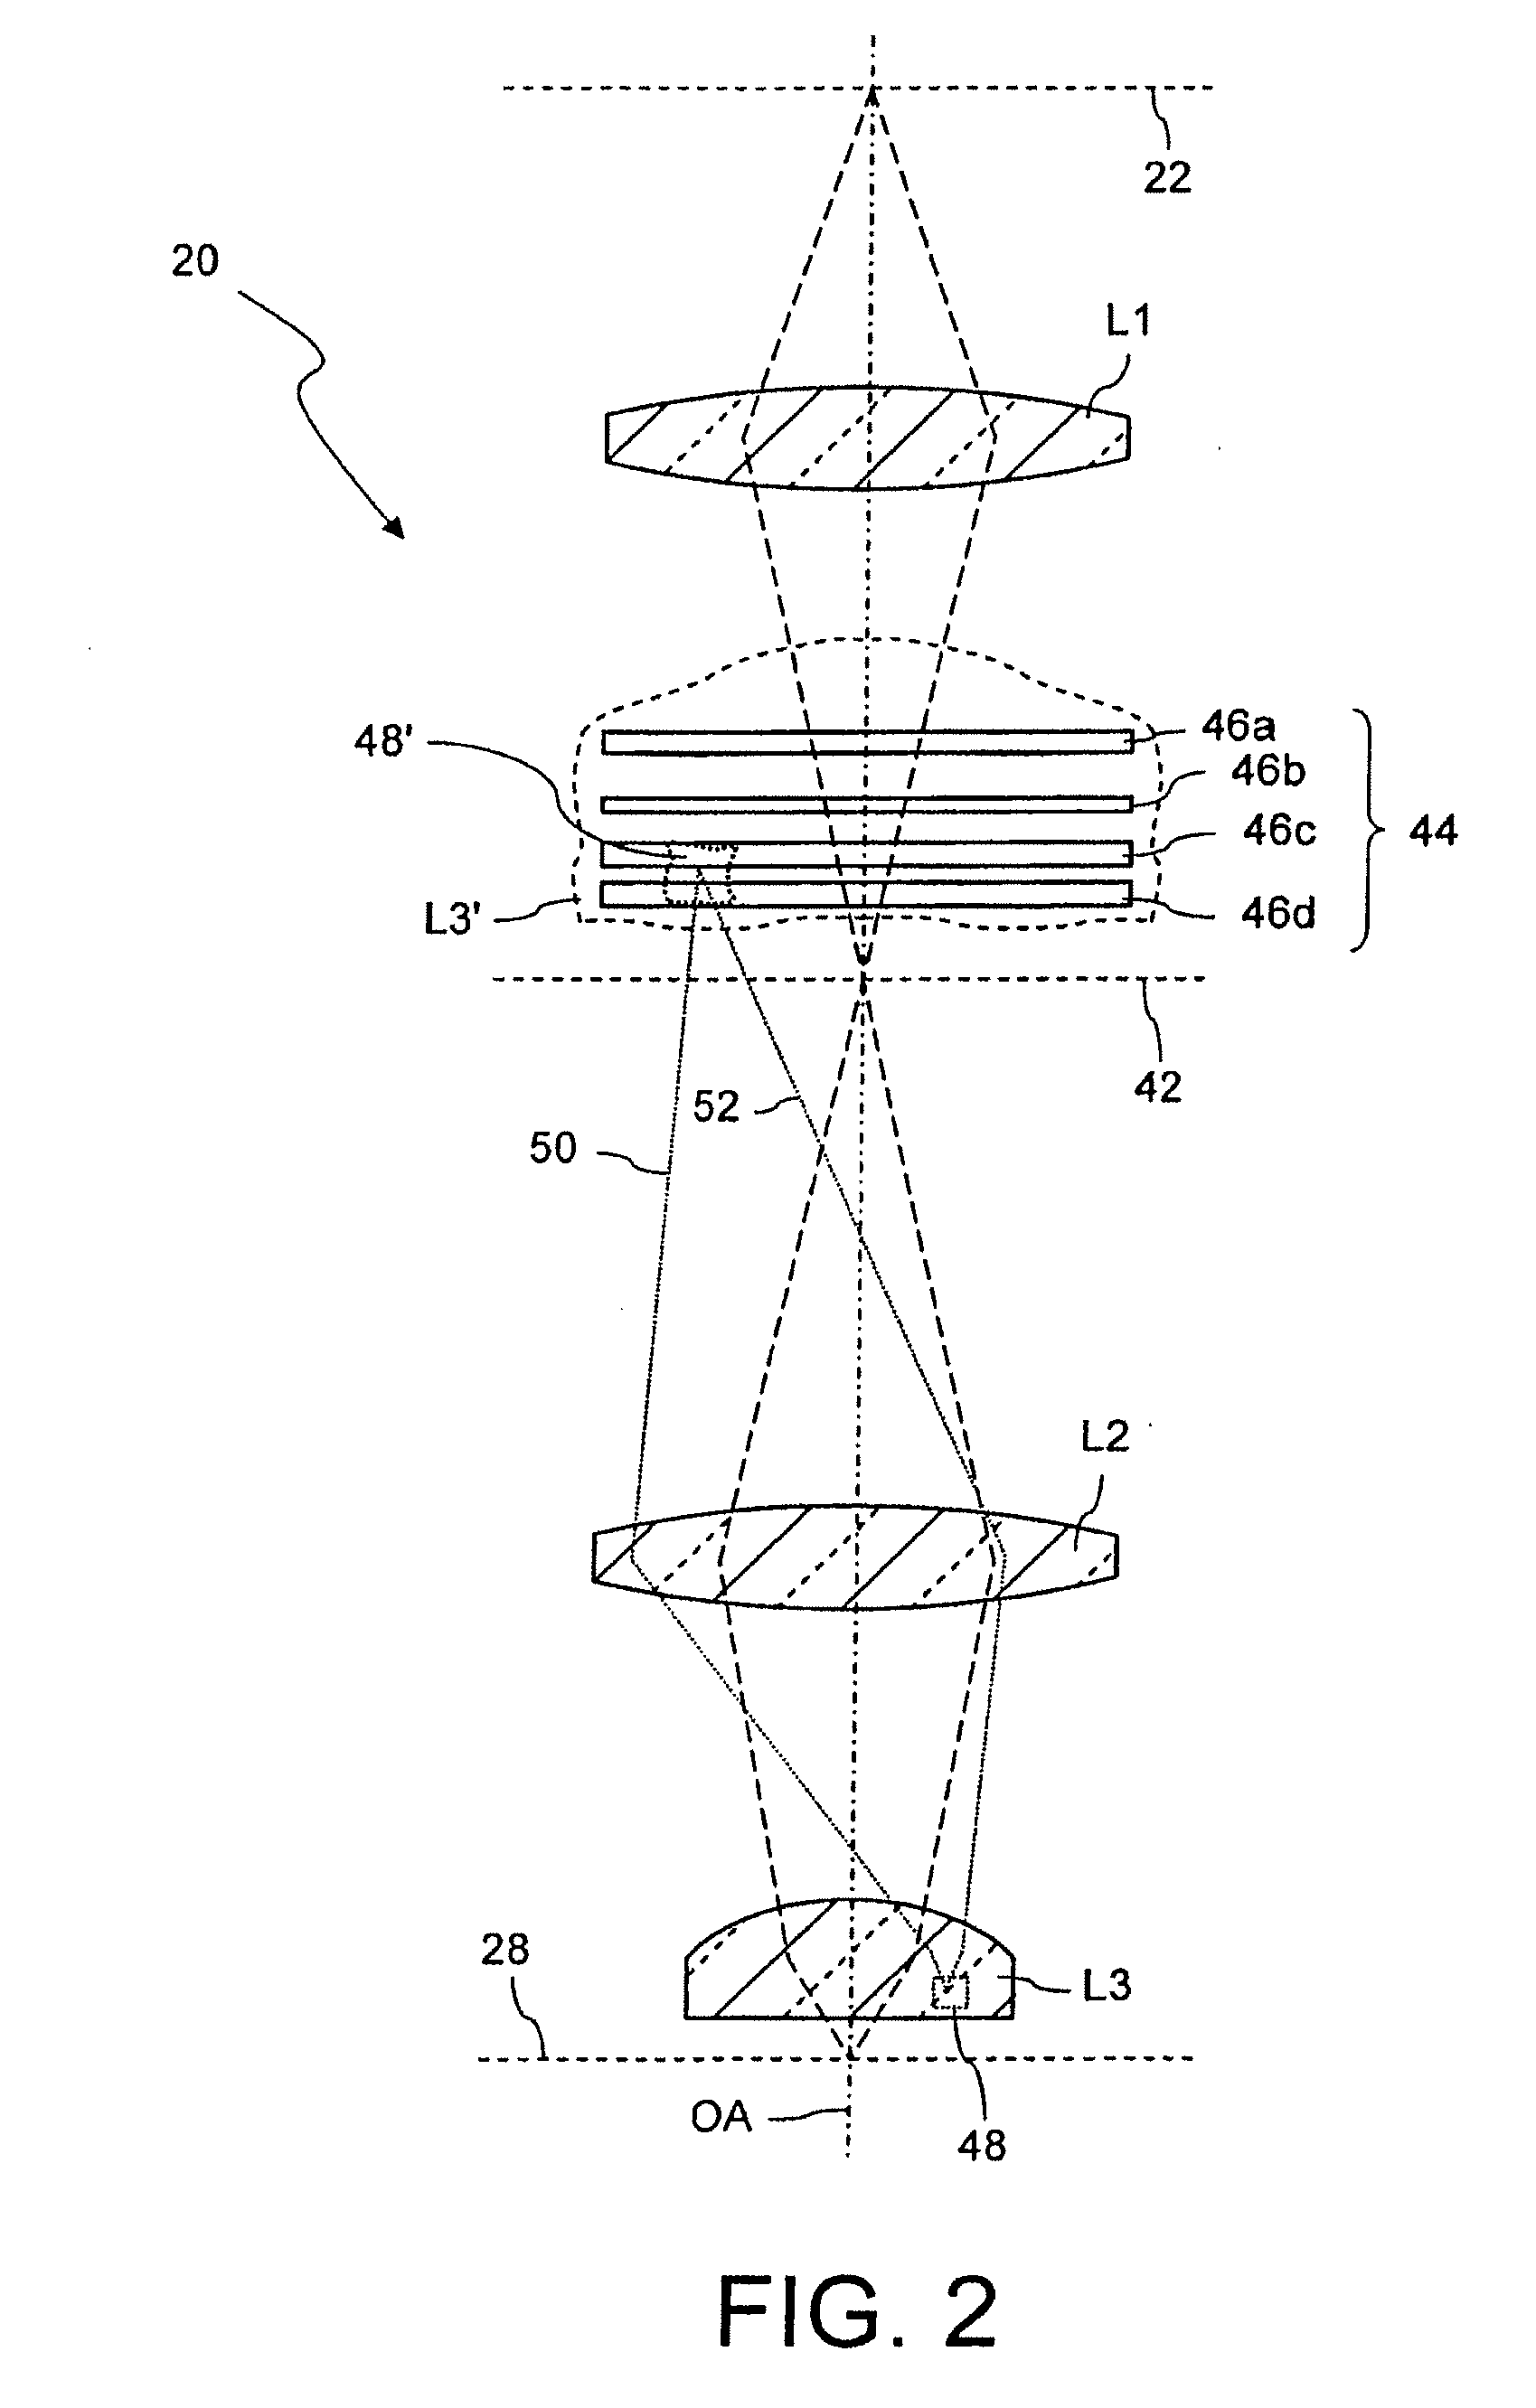 Projection objective of a microlithographic projection exposure apparatus